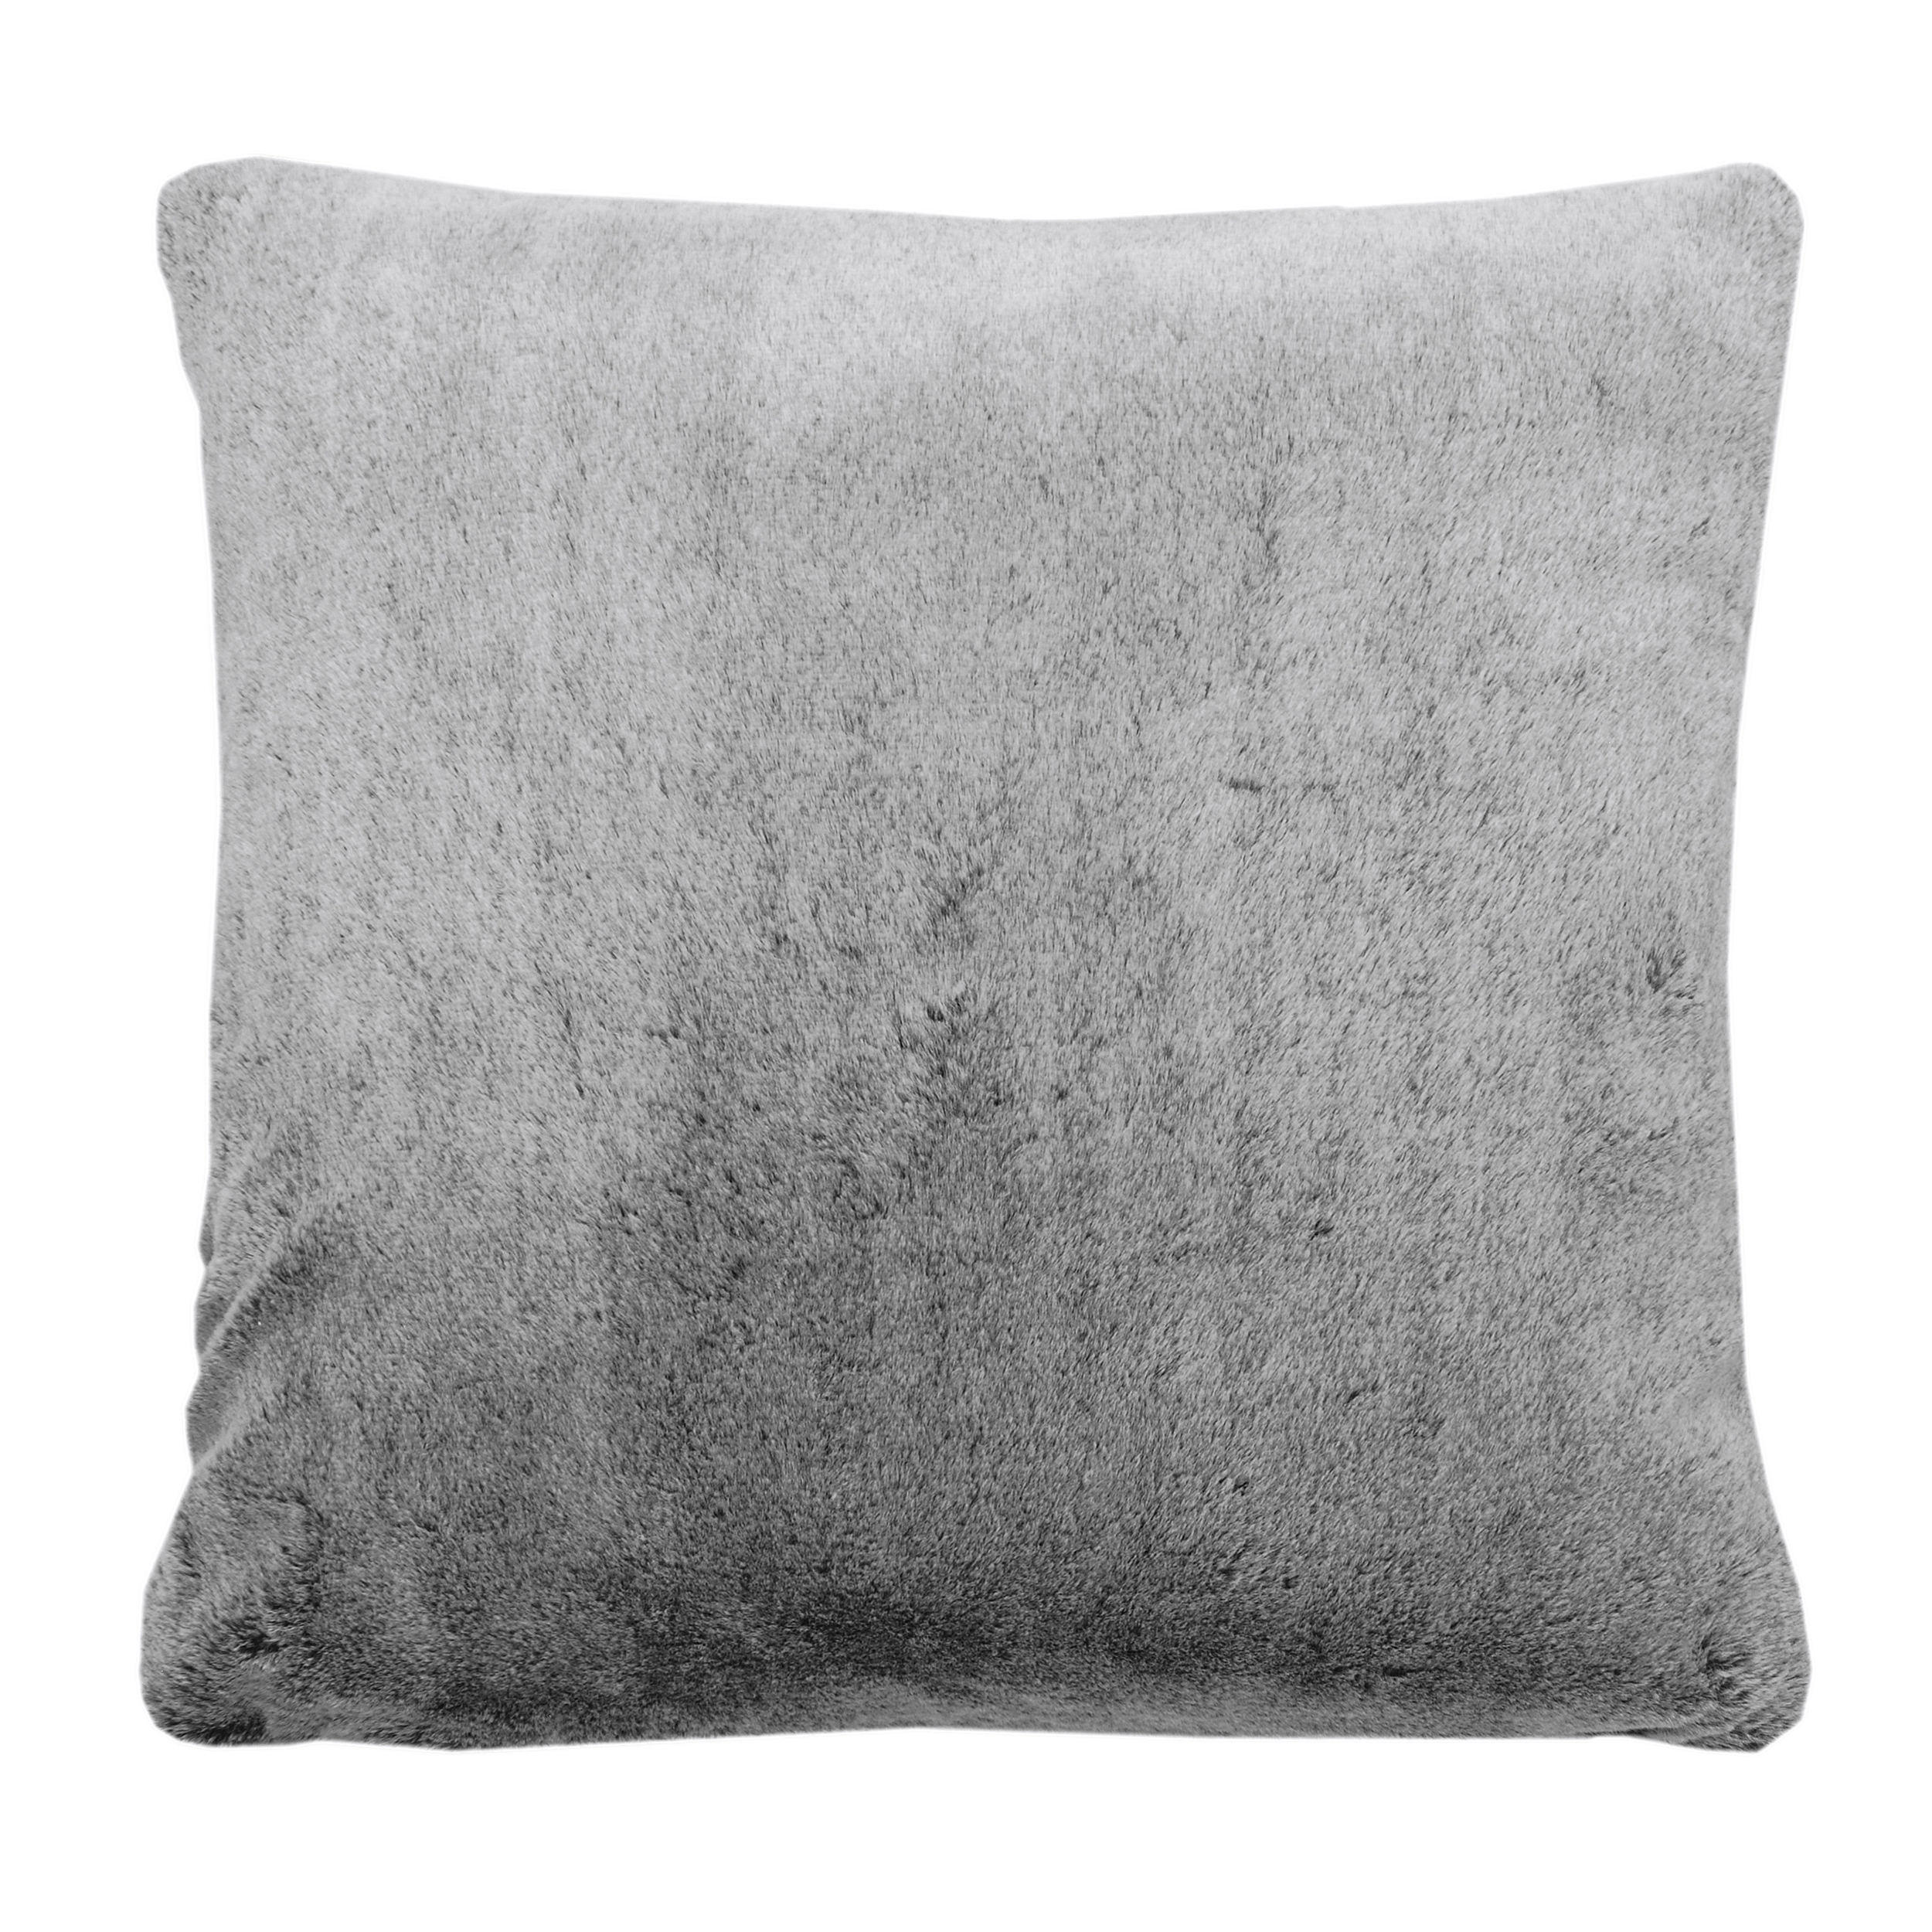 TIPPED FAUX FUR CUSHION CHARCOAL FEATHER FILLED 